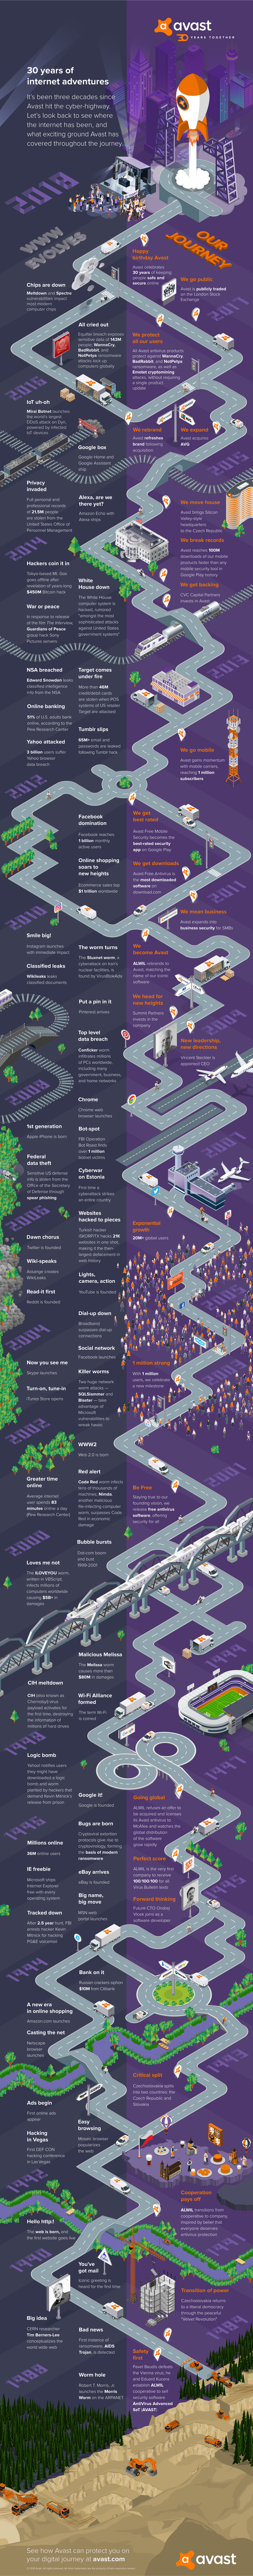 Avast-30-years-timeline-infographic-11-10mb